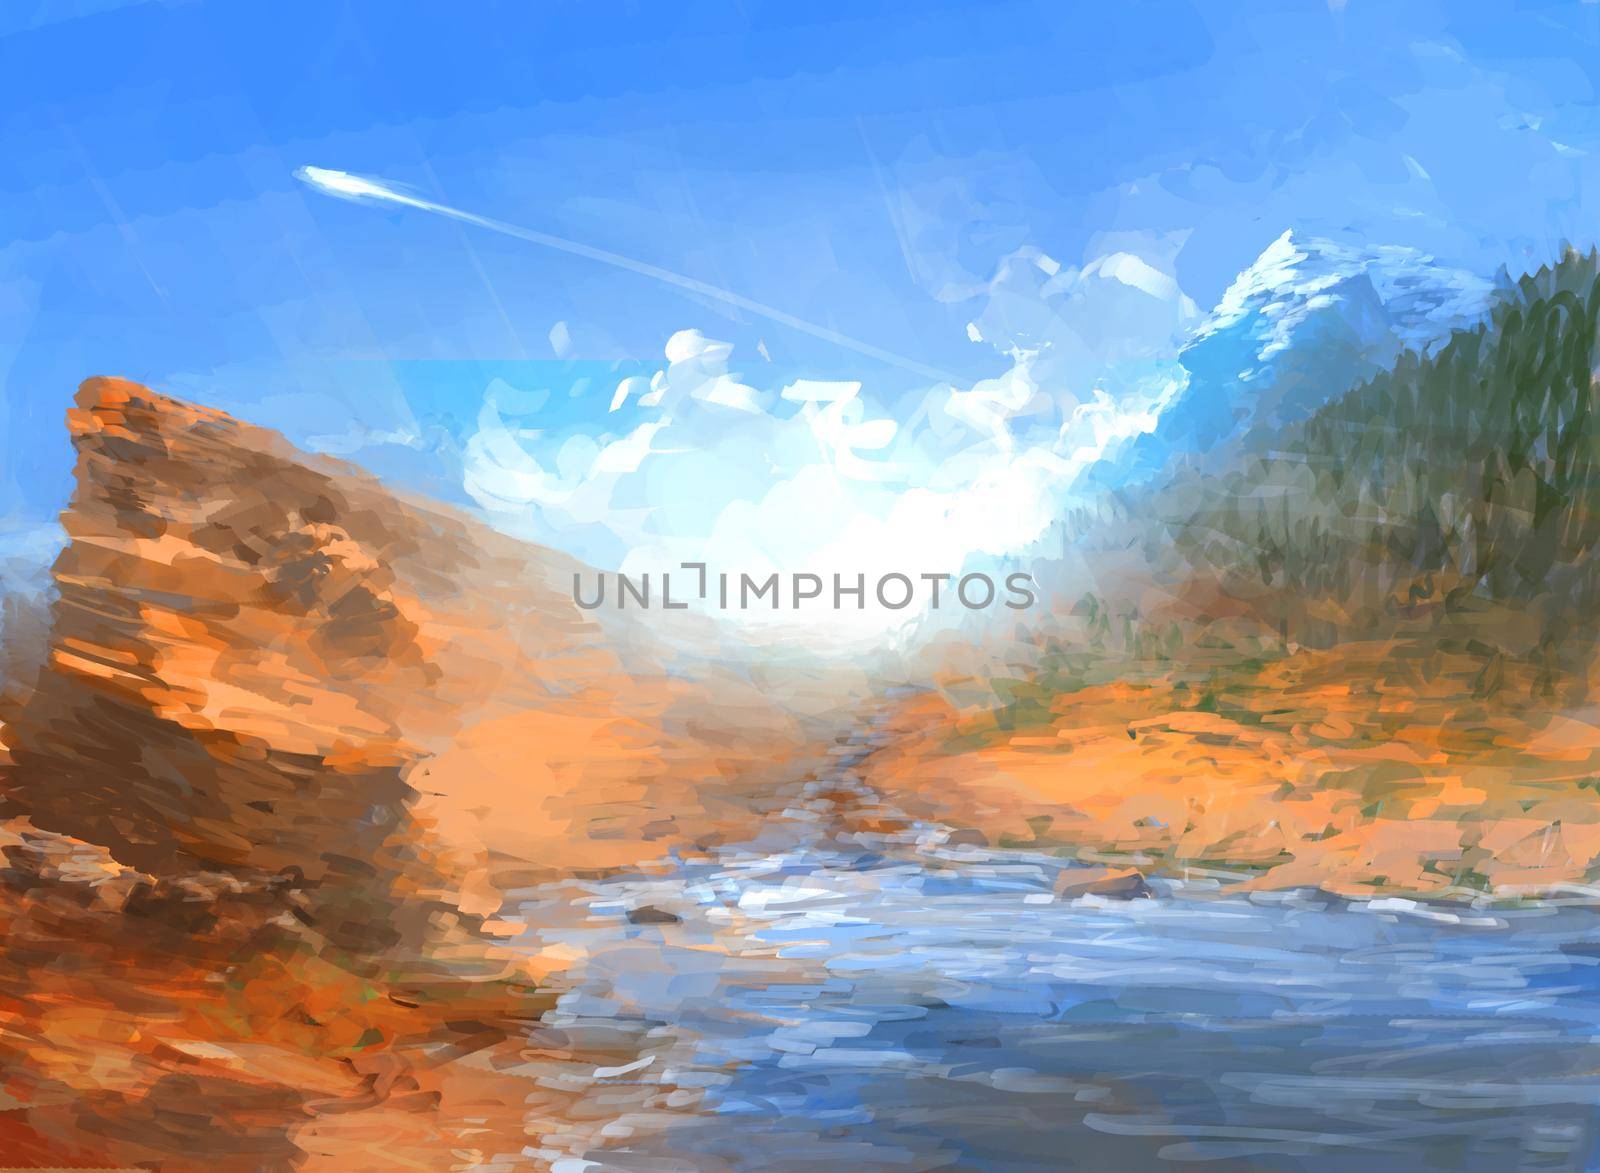 Travel Landscape Illustration with river coast and Mountains under blue sky. Beautiful Nature Scenery.